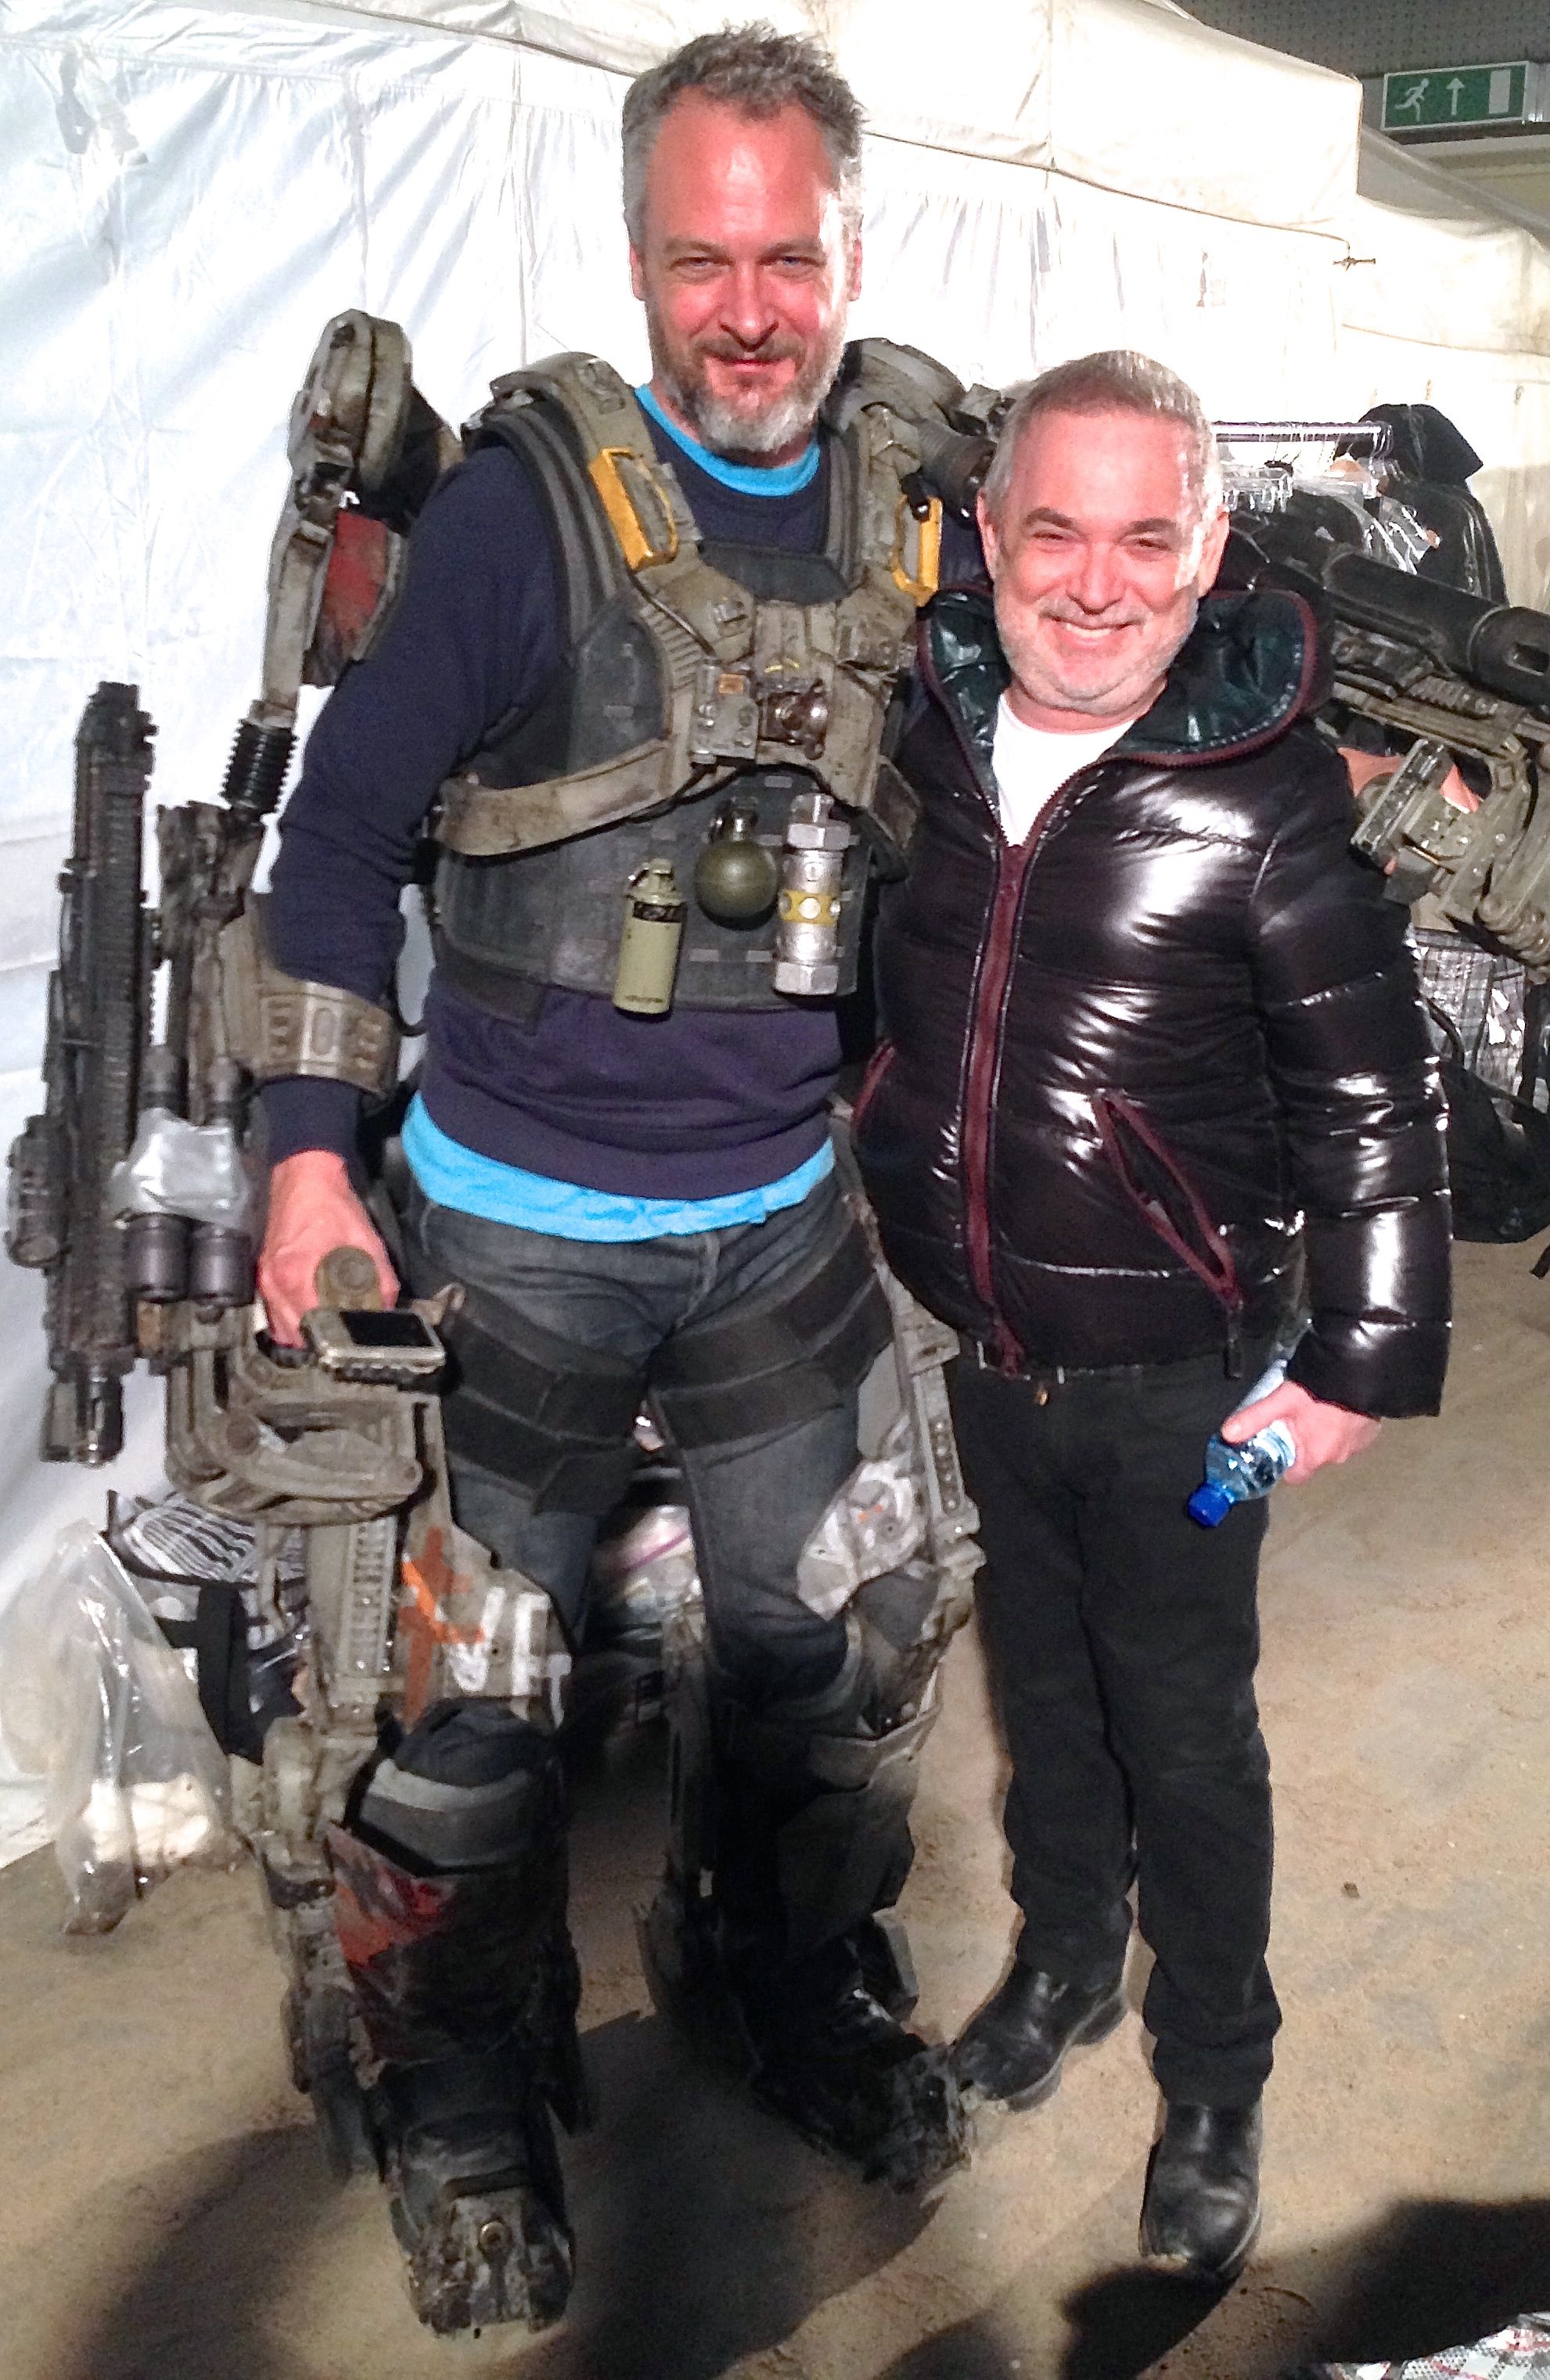 On set of EDGE OF TOMORROW with producer Erwin Stoff